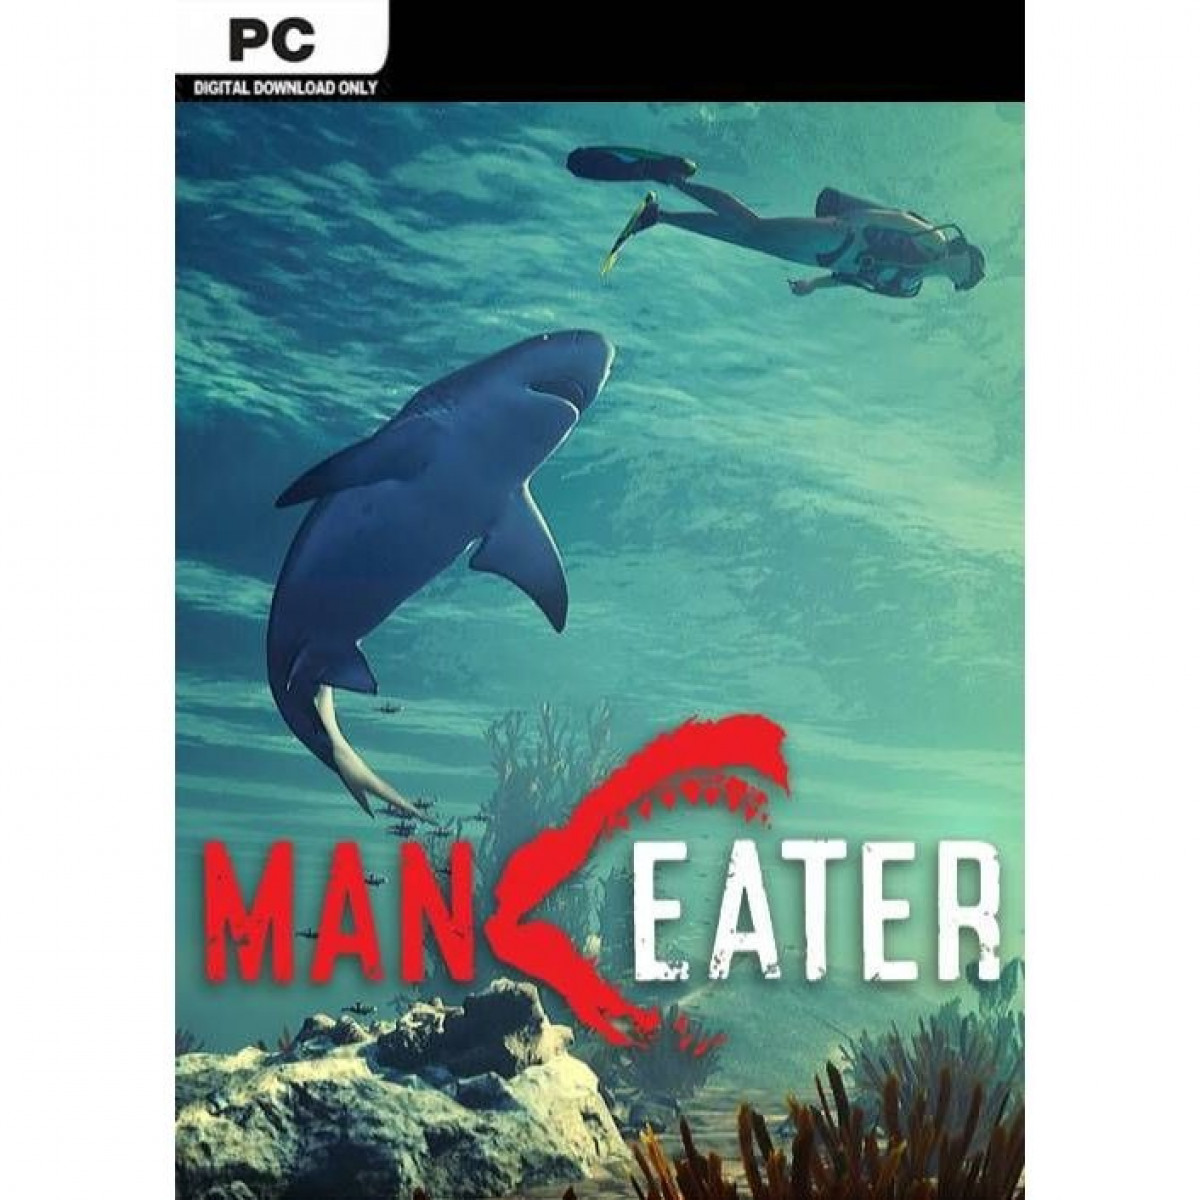 Maneater PC Games Download